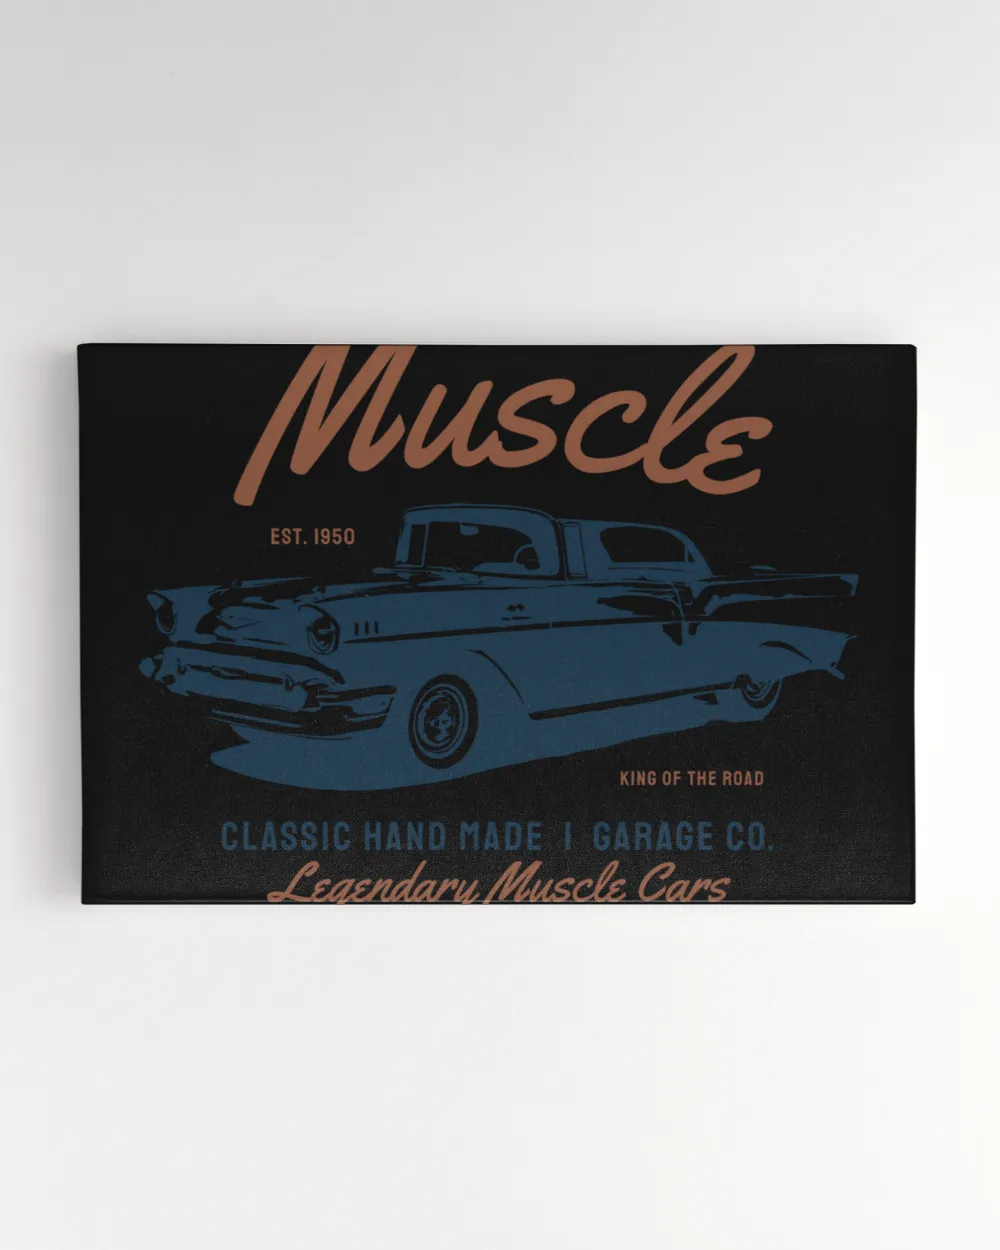 Muscle Est 1950 King Of The Road Classic Hand Made Legendary Muscle Cars Los Angeles California Usa Retro Vintage